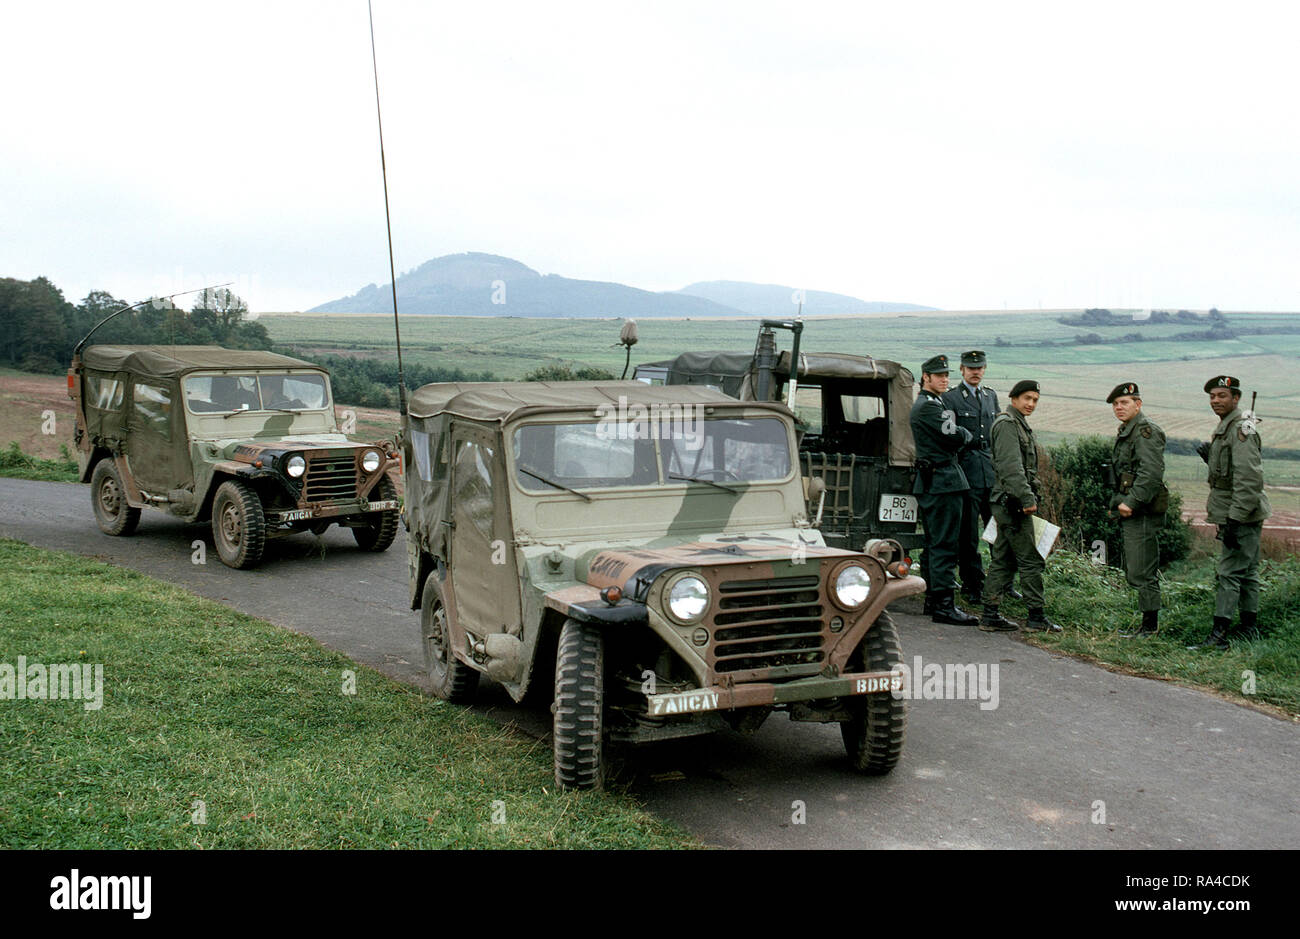 1979 - Members of the 11th Armored Cavalry stop to talk with West German soldiers while patrolling the border between East and West Germany in M151 light vehicles. Stock Photo